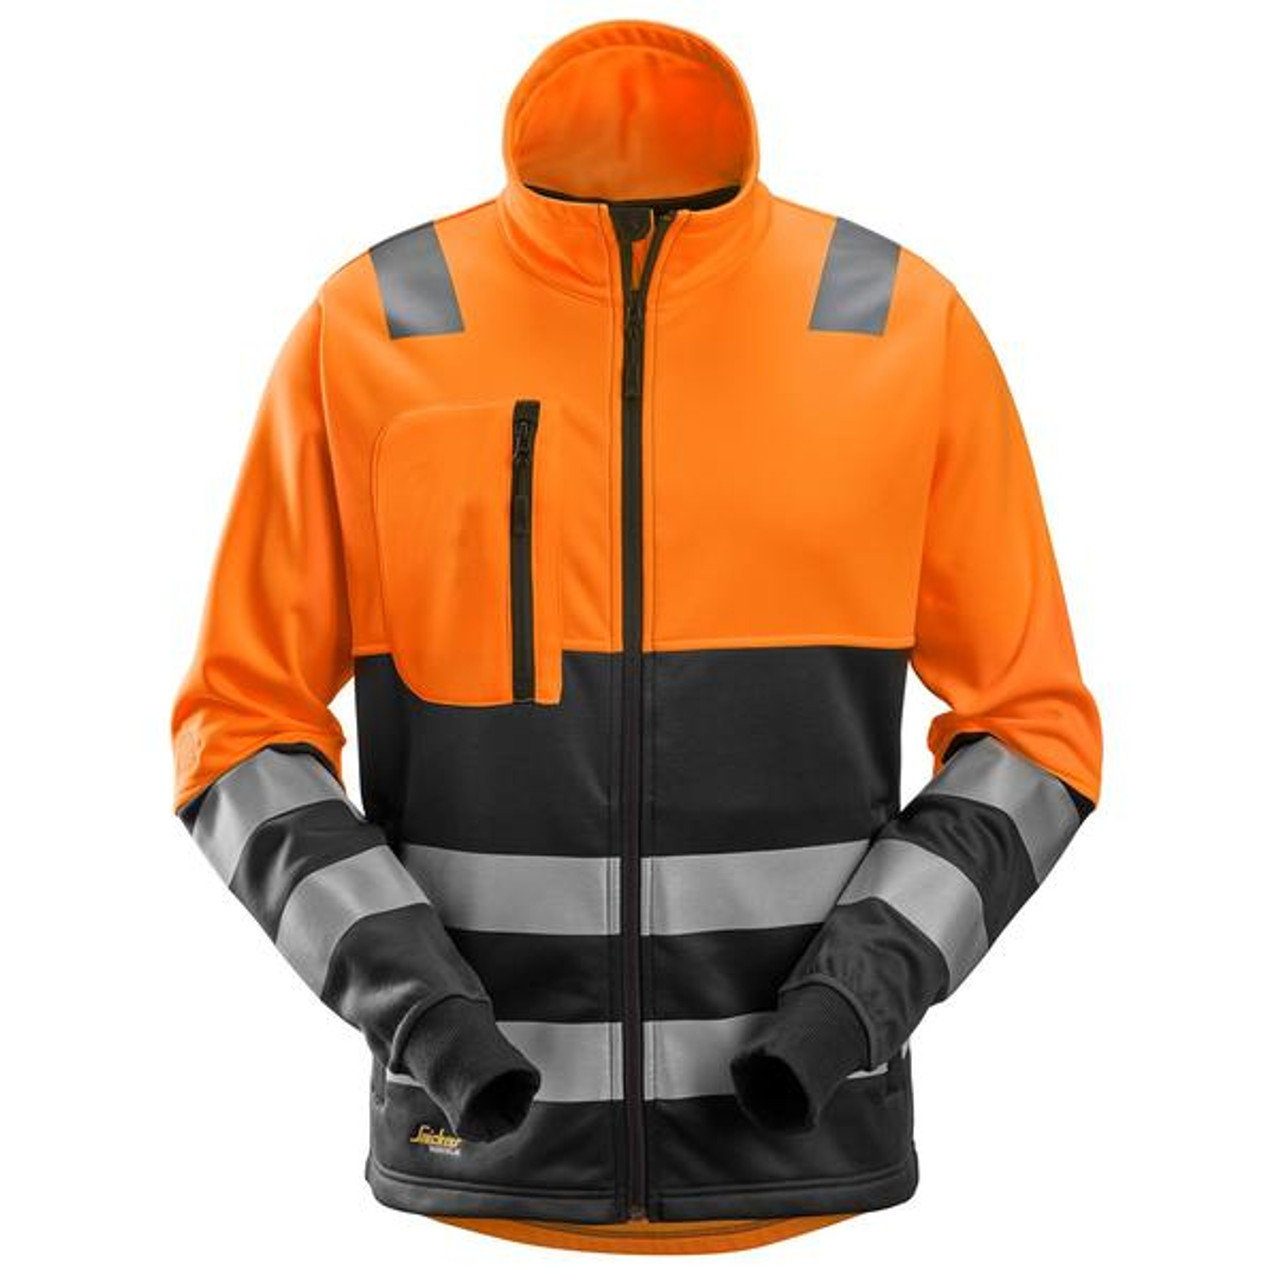 BLAKLADER Jacket 8035 with  for BLAKLADER Jacket | 8035 High Vis Orange / Black Full Zip Allround Work Pullover with Reflective Tape Polyester that have Full Zip  available in Australia and New Zealand